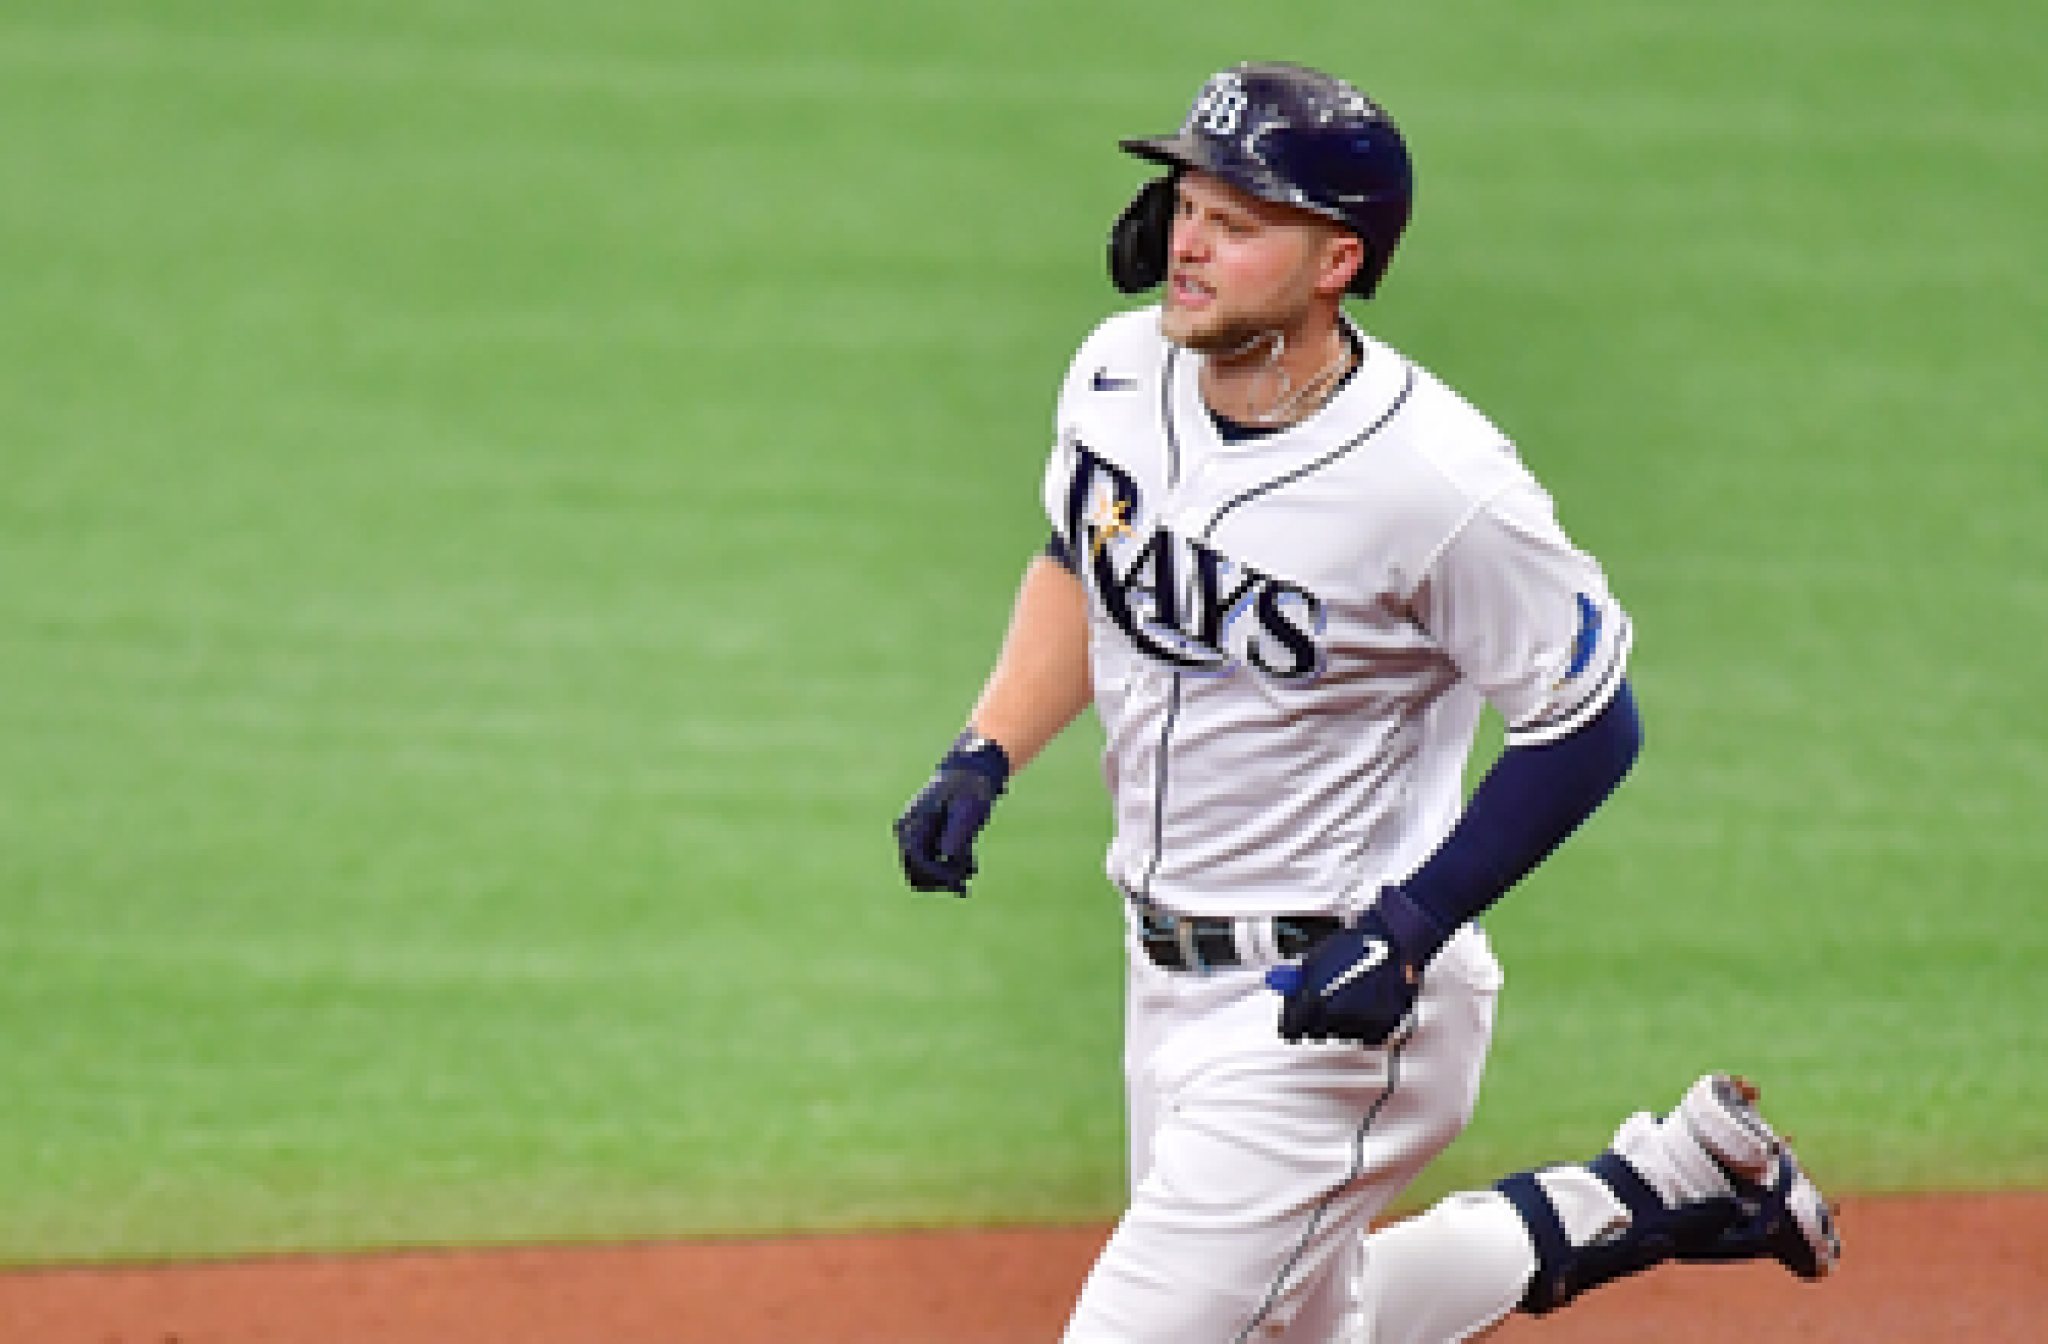 Mike Zunino, Austin Meadows go back-to-back in Rays dominant win over Royals, 14-7